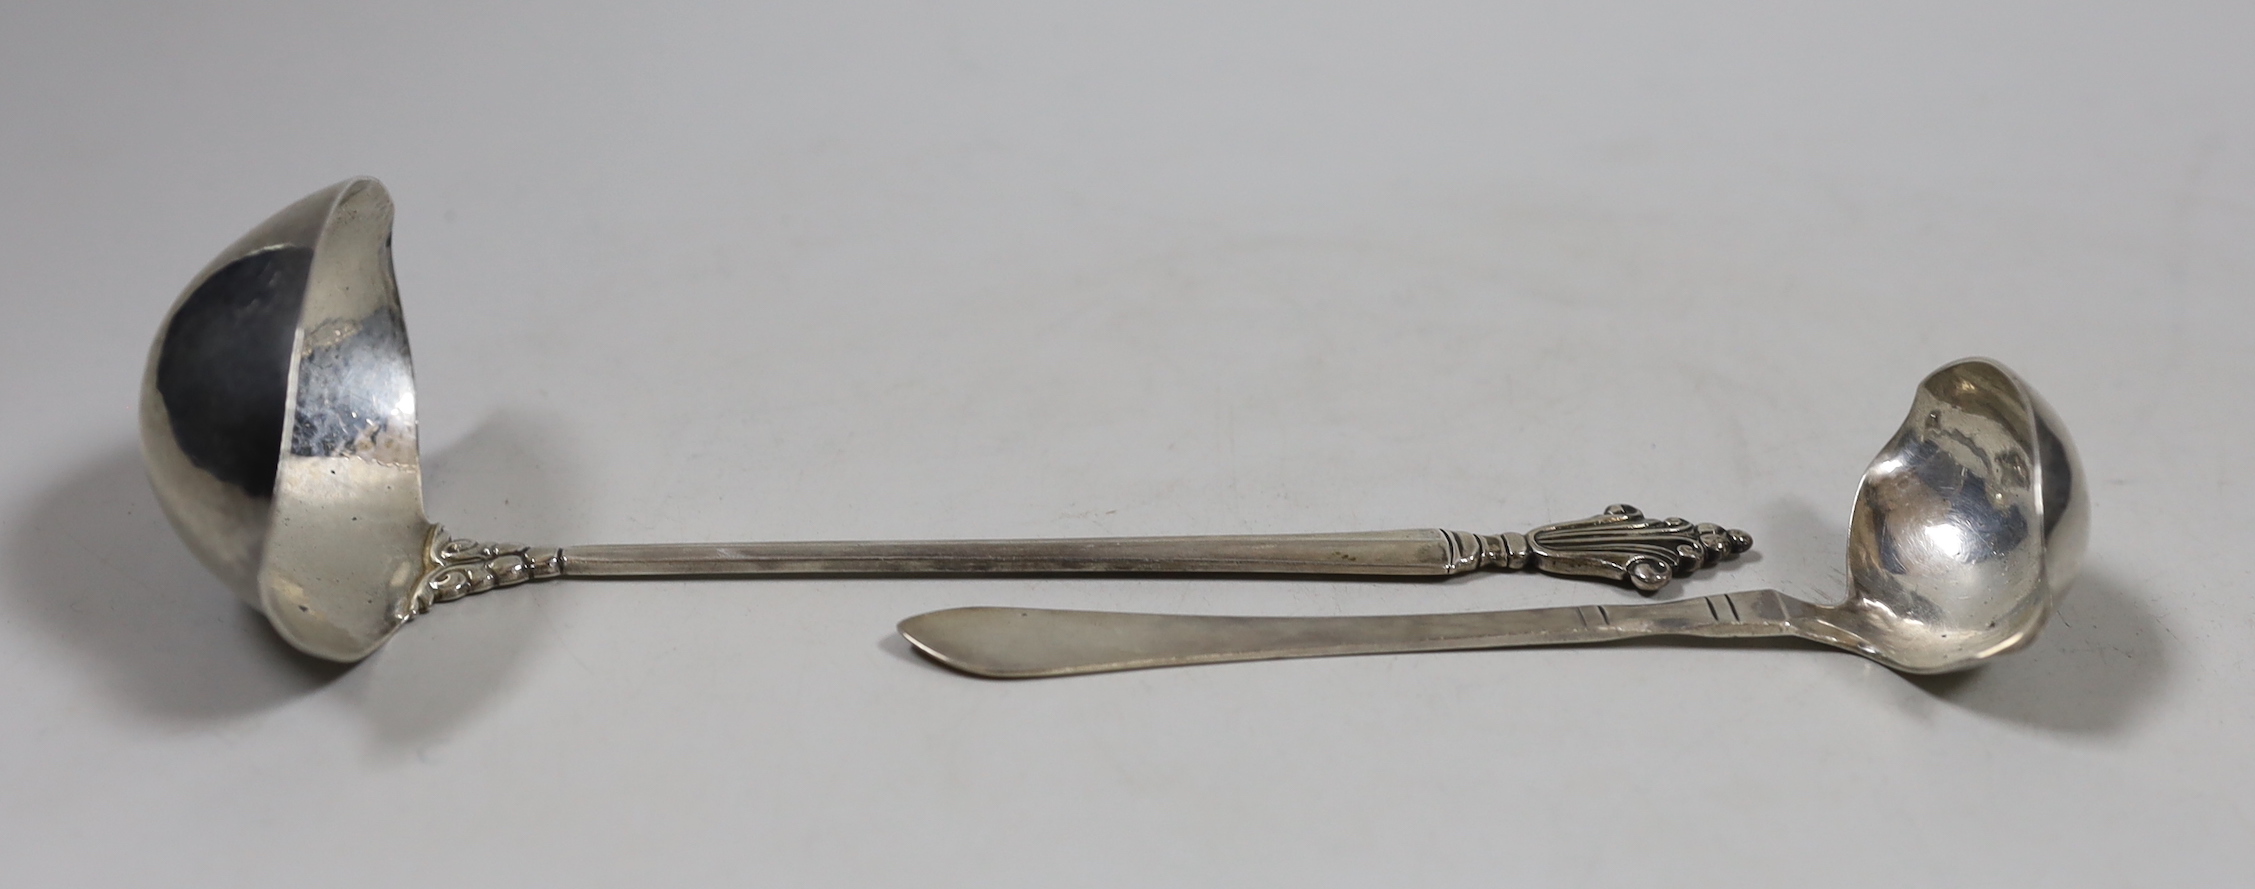 Two Georg Jenson sterling silver ladles, import marks for London, 1926, largest 19cm.                                                                                                                                       